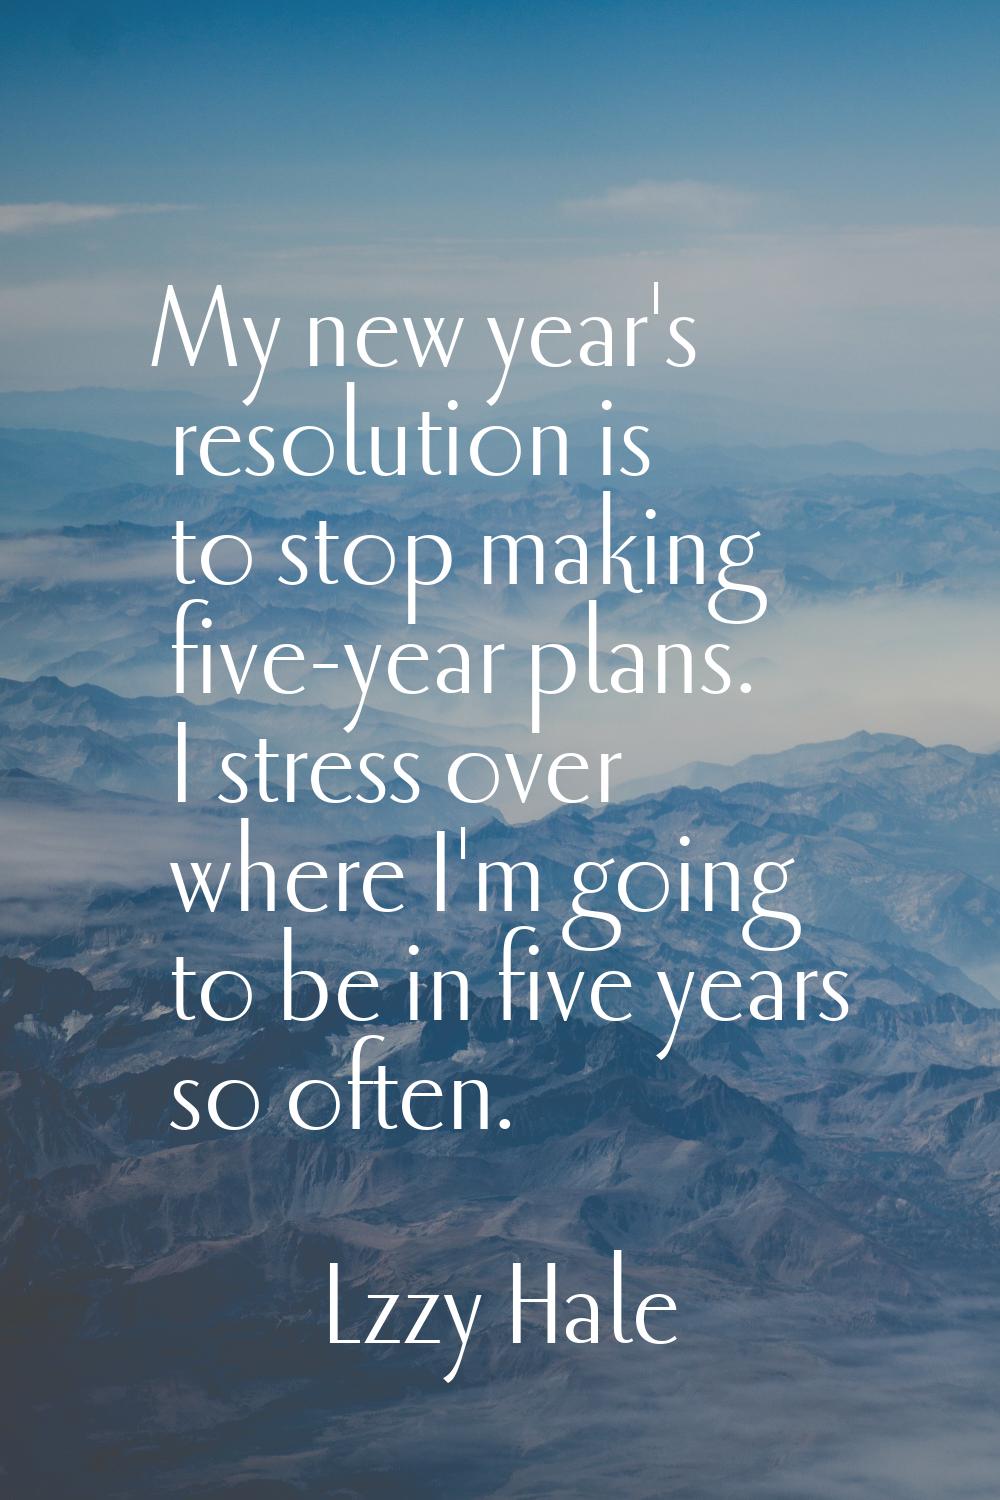 My new year's resolution is to stop making five-year plans. I stress over where I'm going to be in 